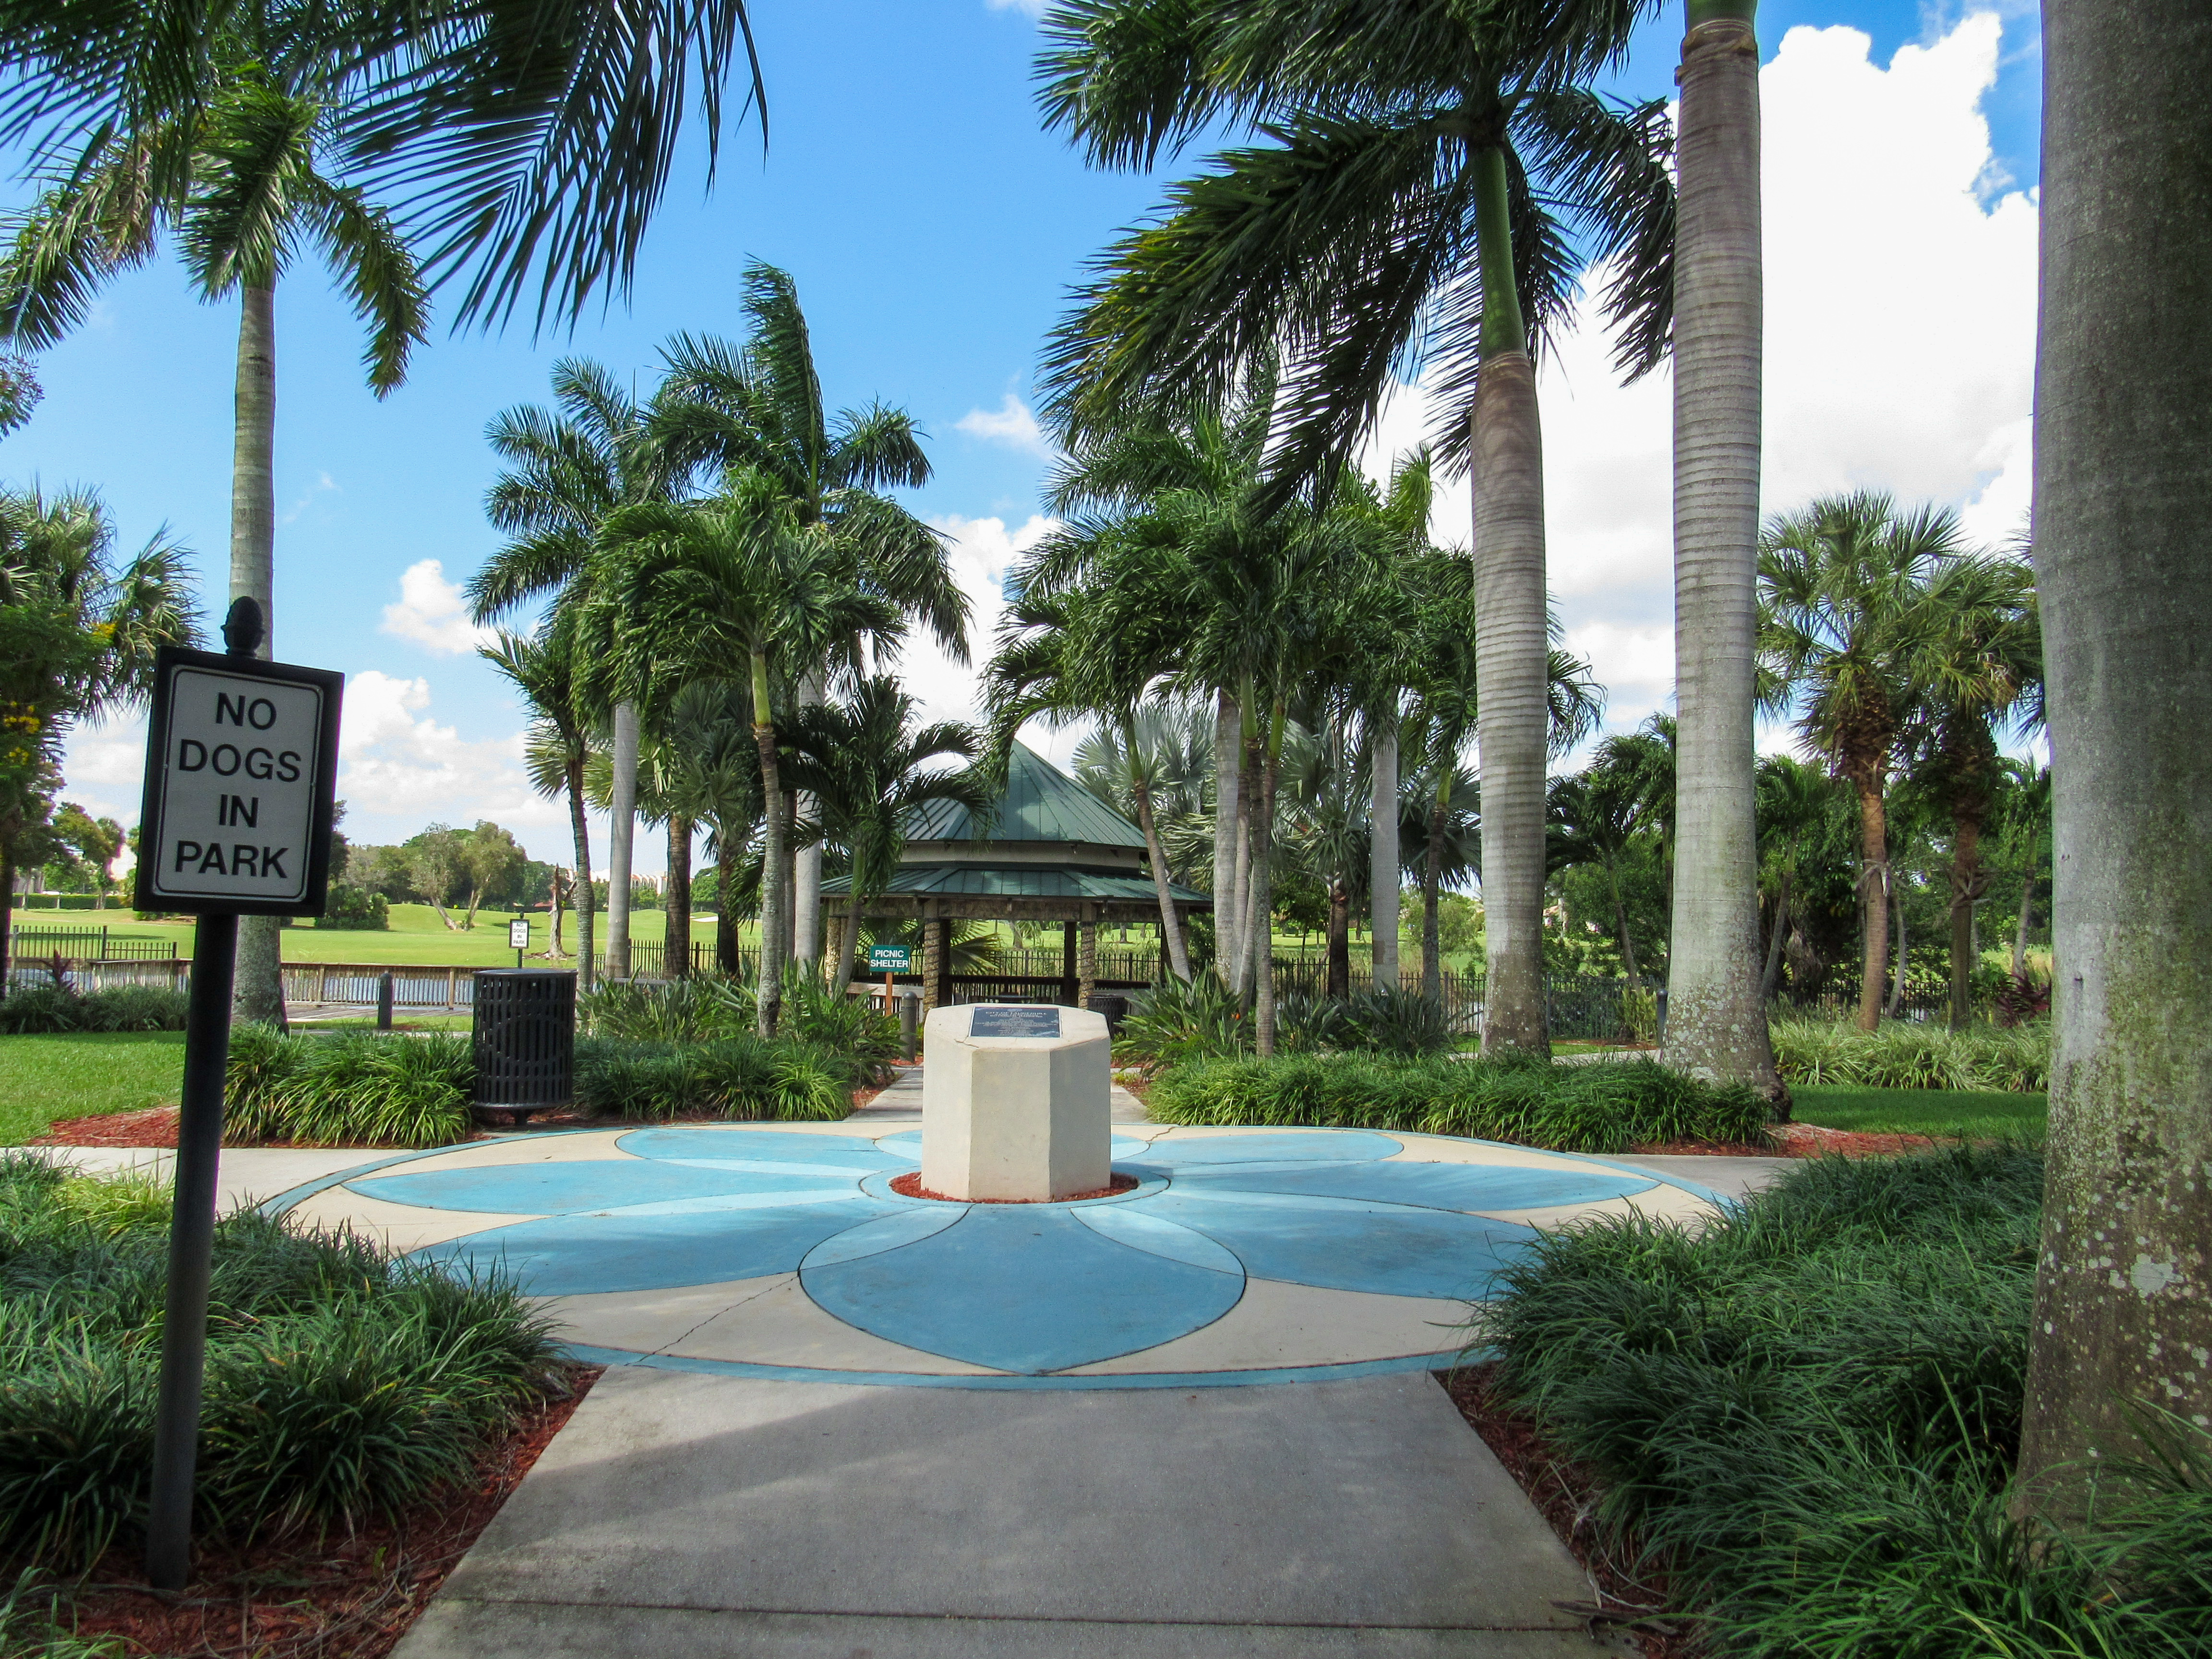 Five Best Parks In Broward And Miami Dade Counties South Florida